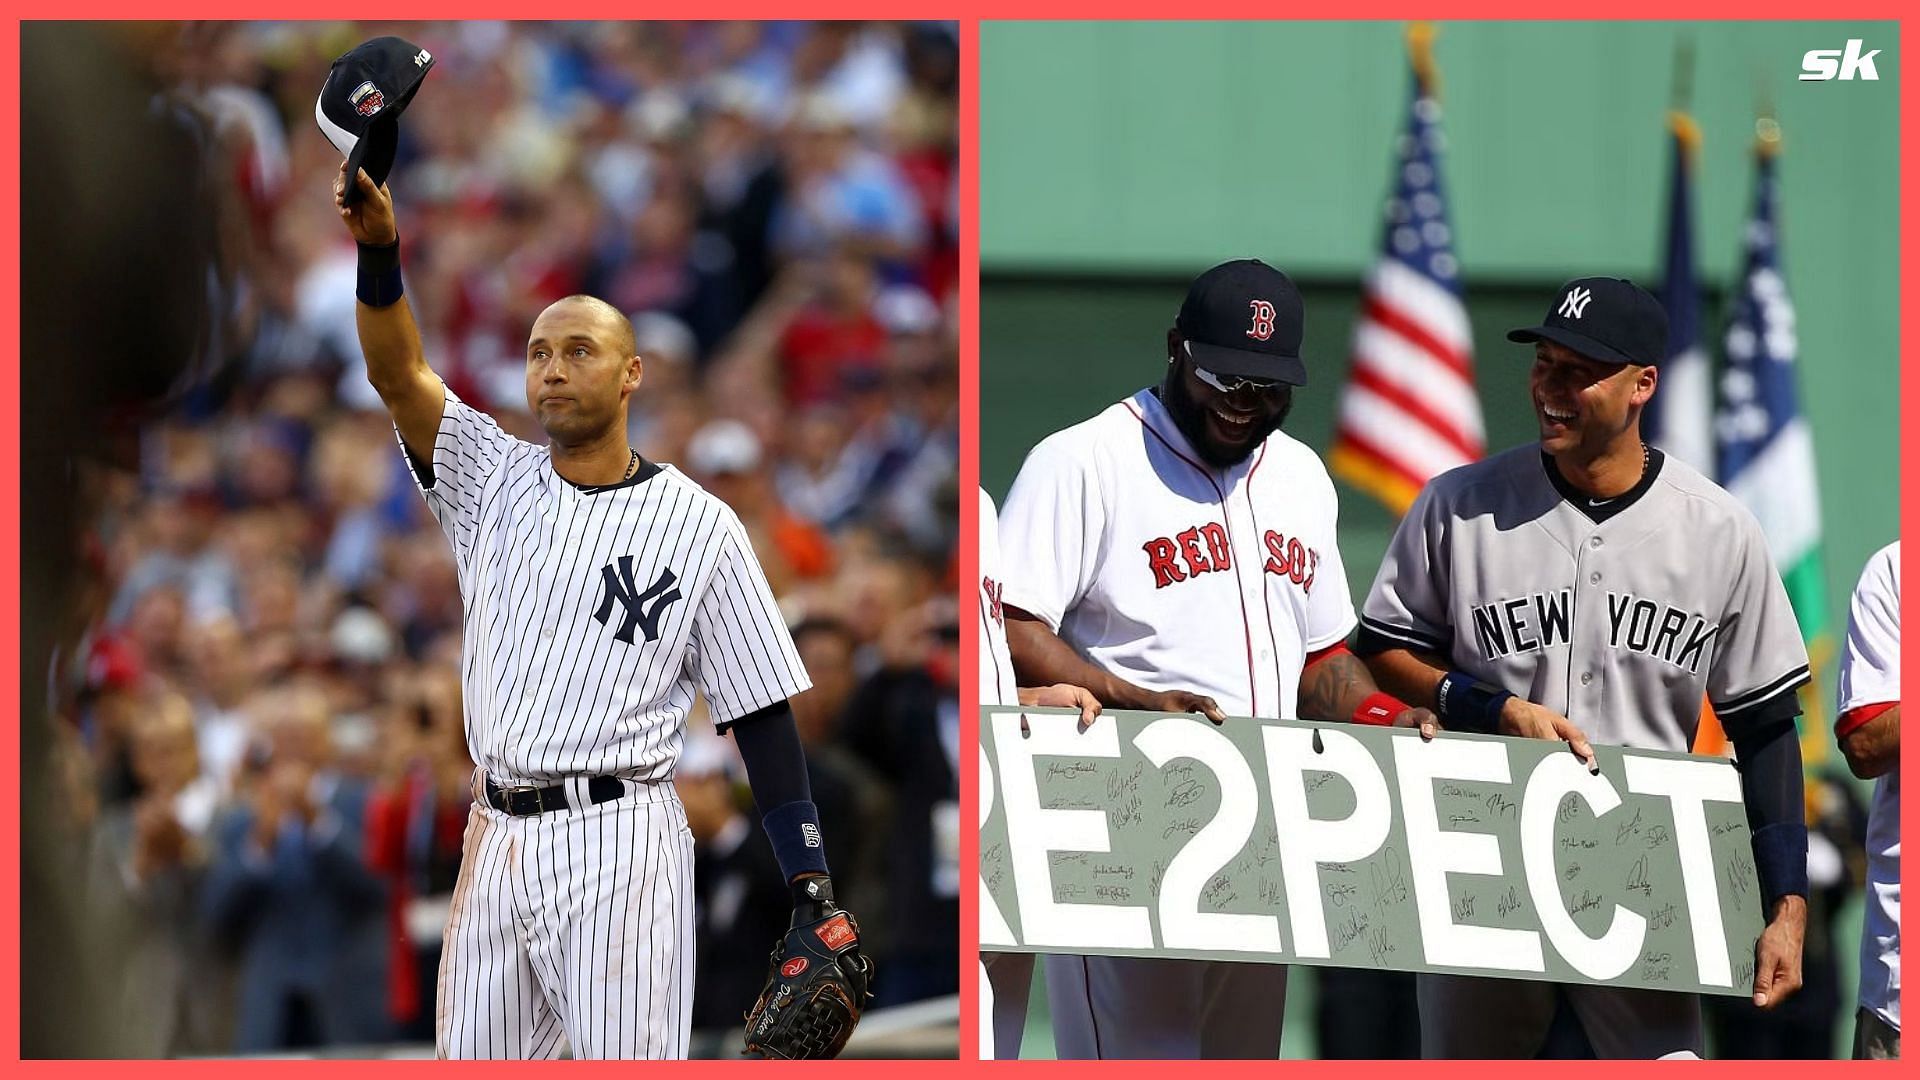 Why was Derek Jeter holding a Red Sox jersey? Yankees legend